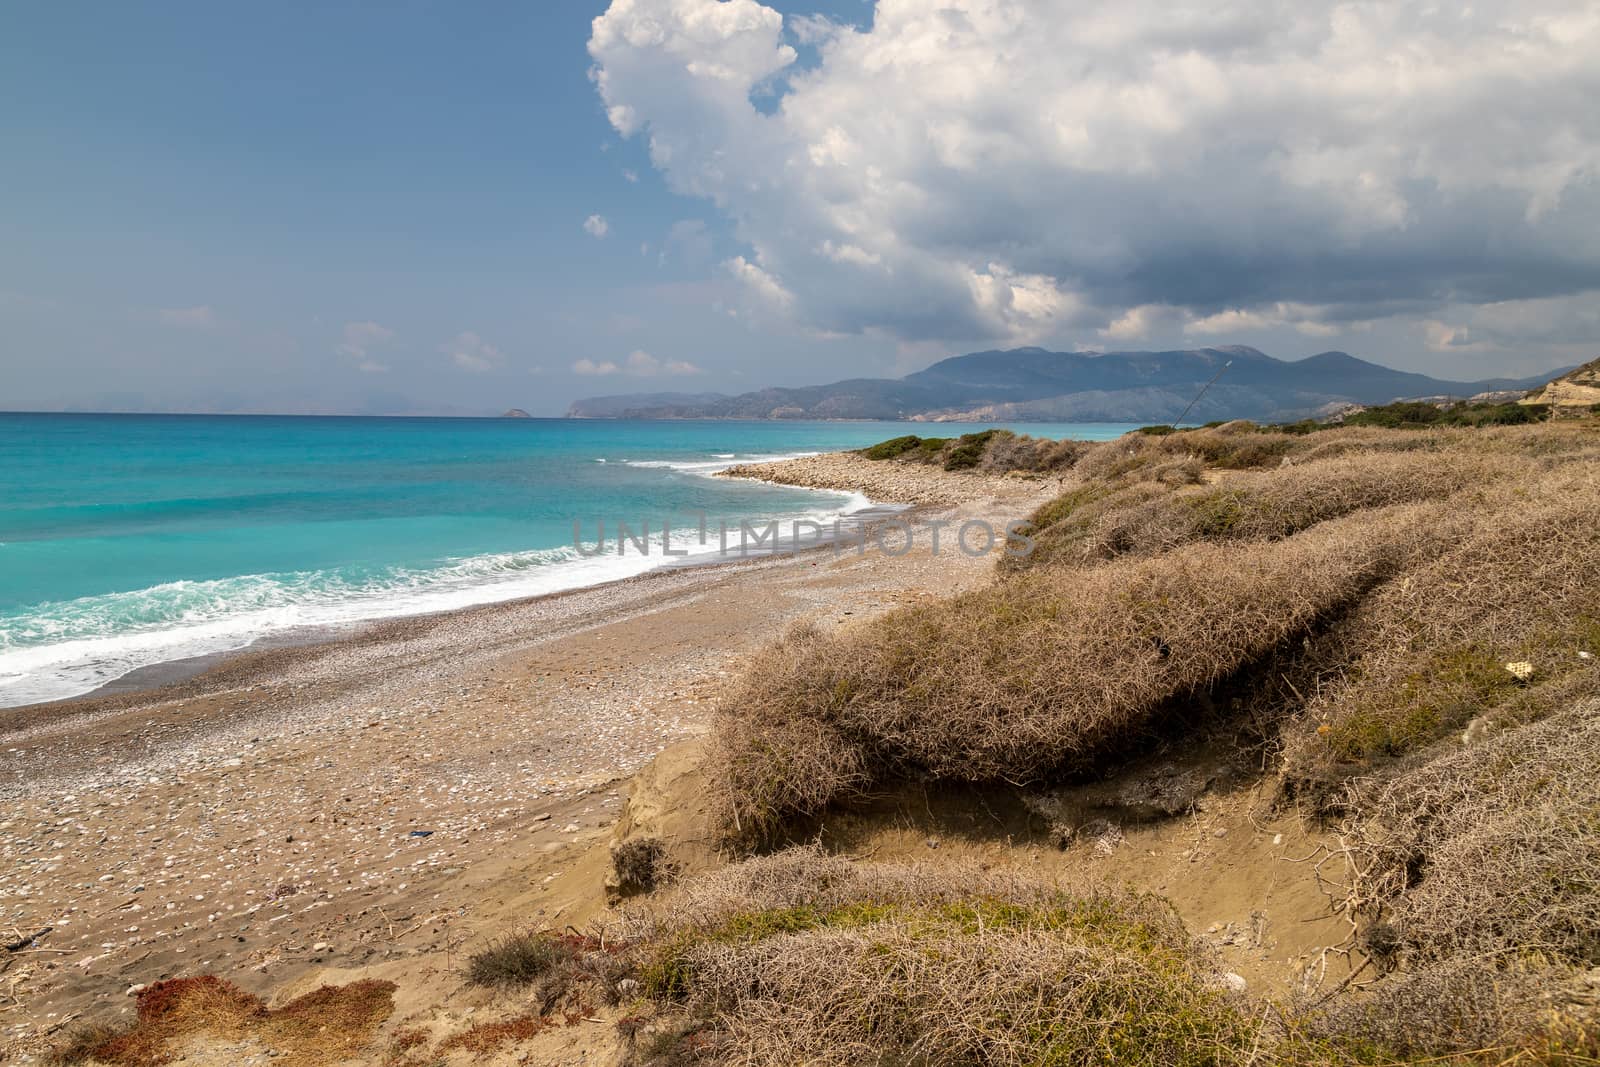 Gravel / pebble beach at the westcoast of Rhodes island near Kattavia with ocean waves and turquoise water